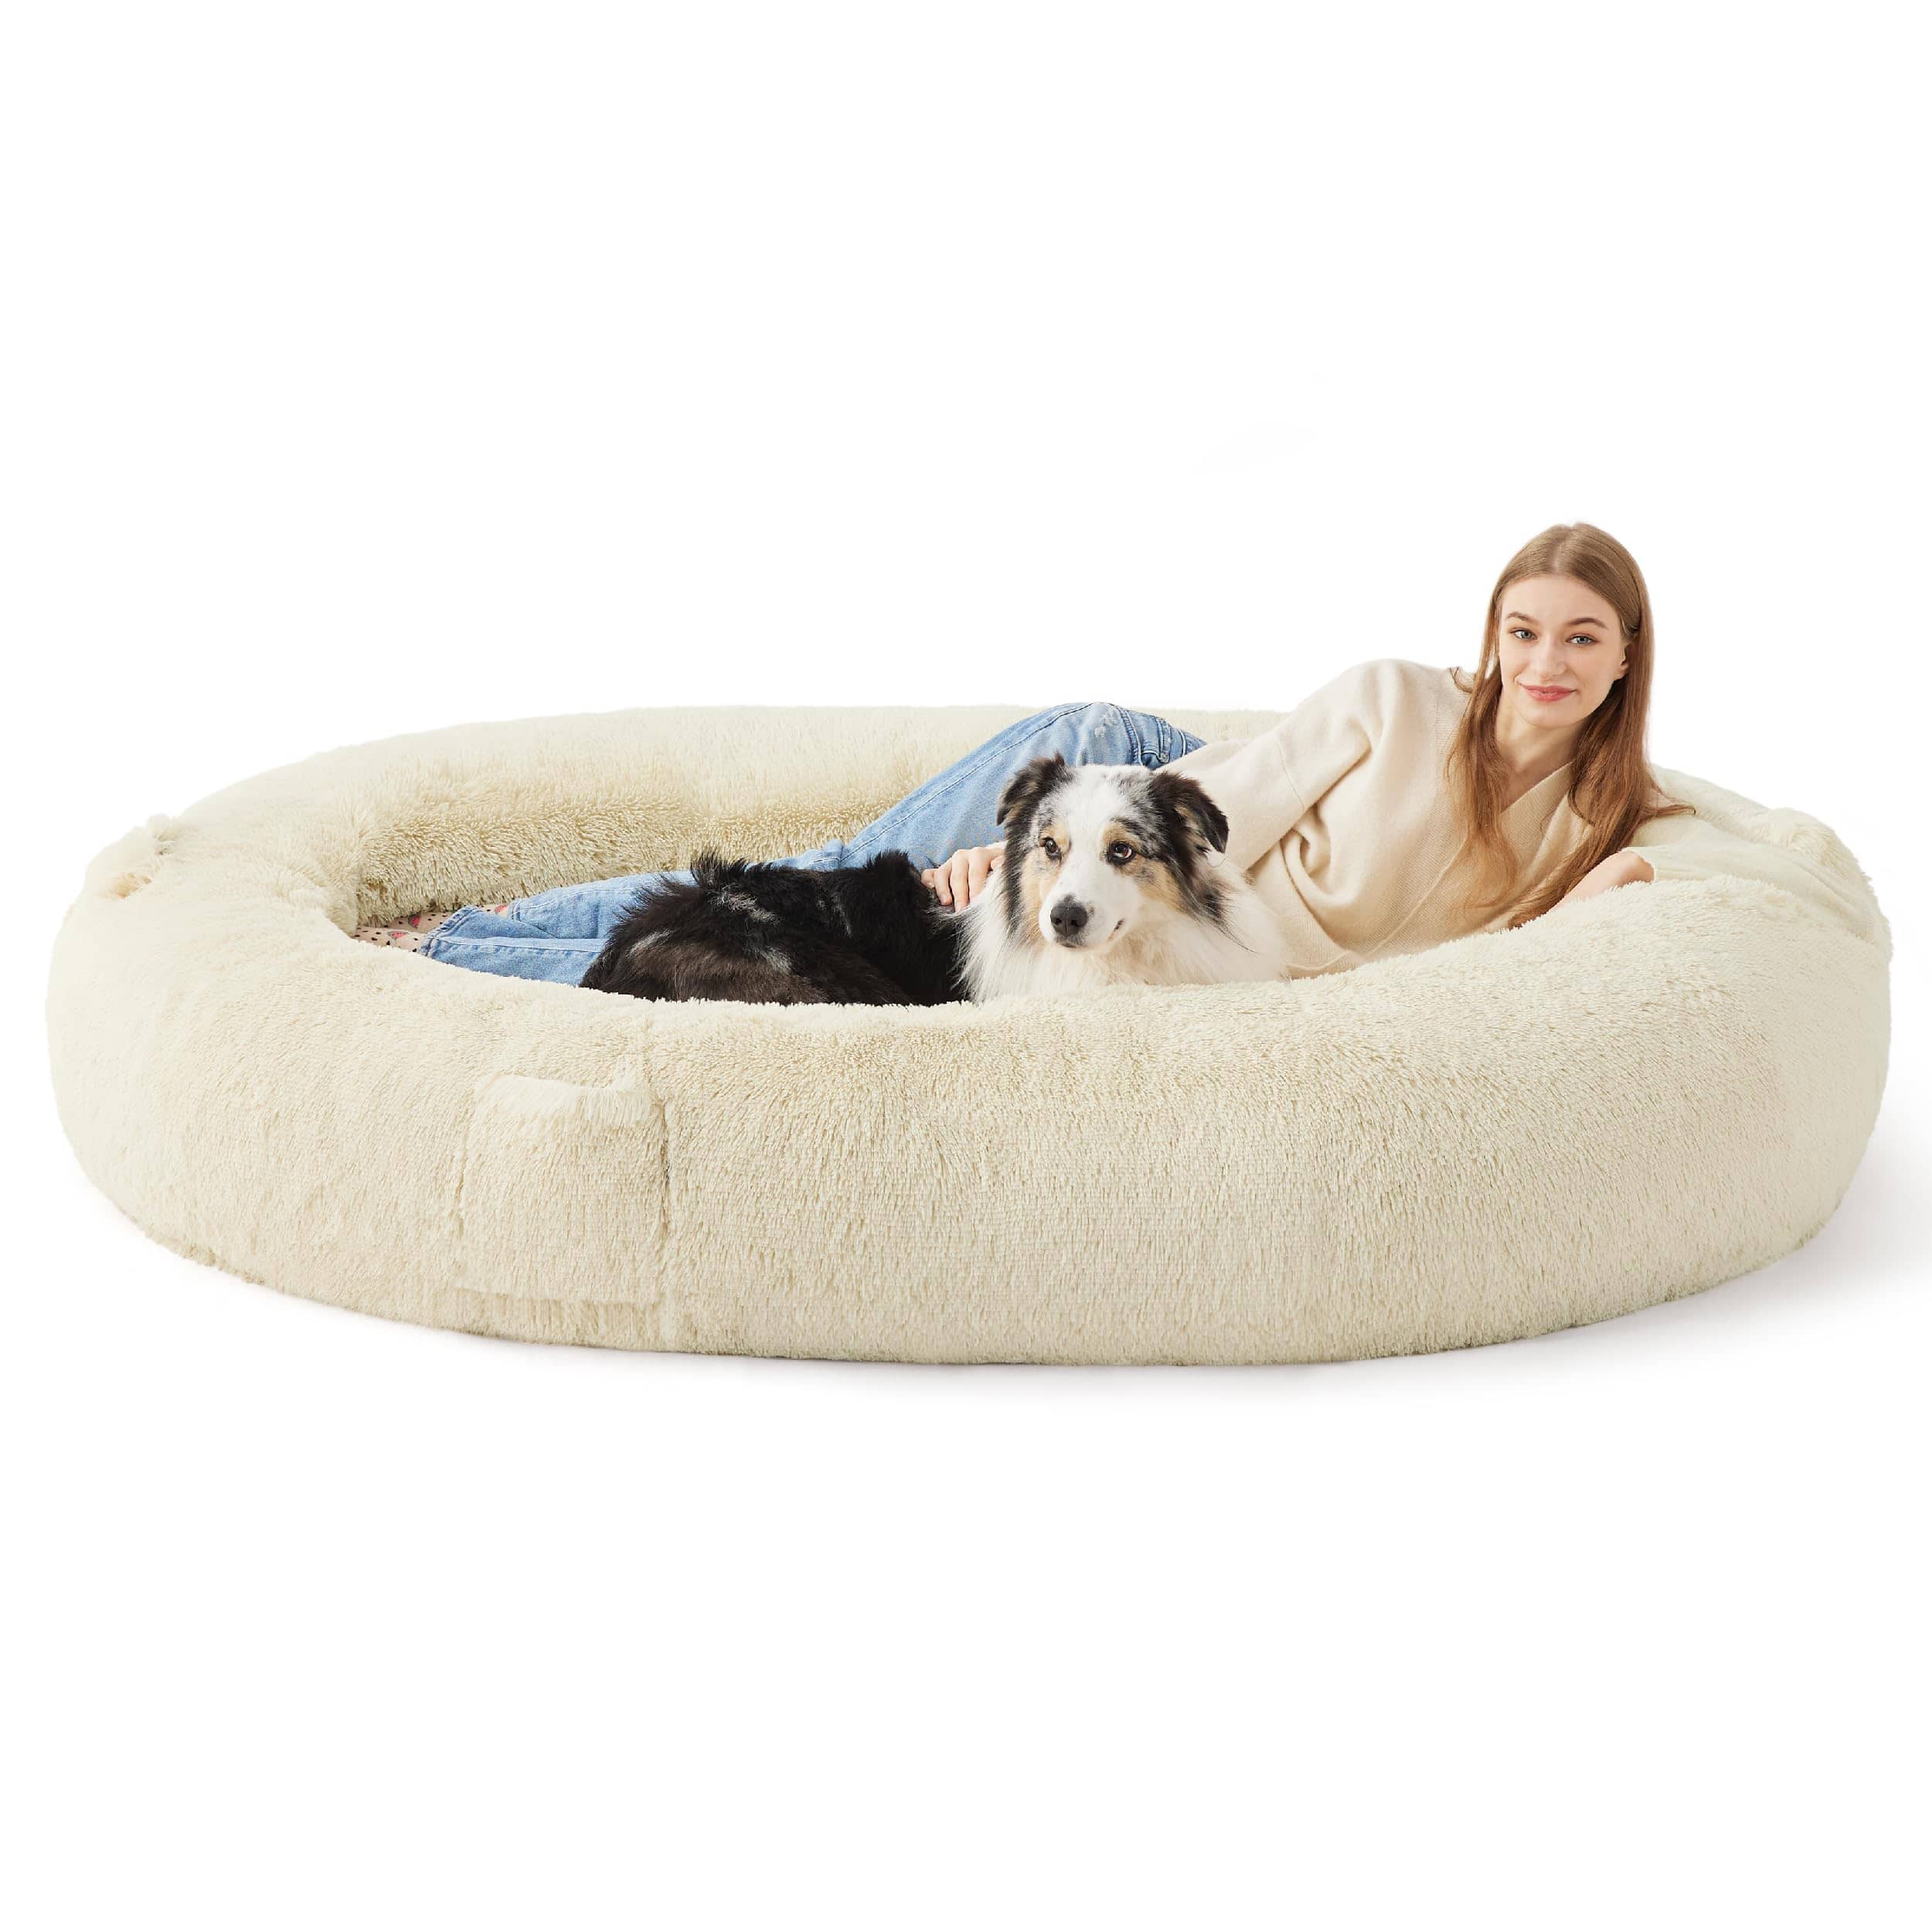 Human-Sized Dog Bed